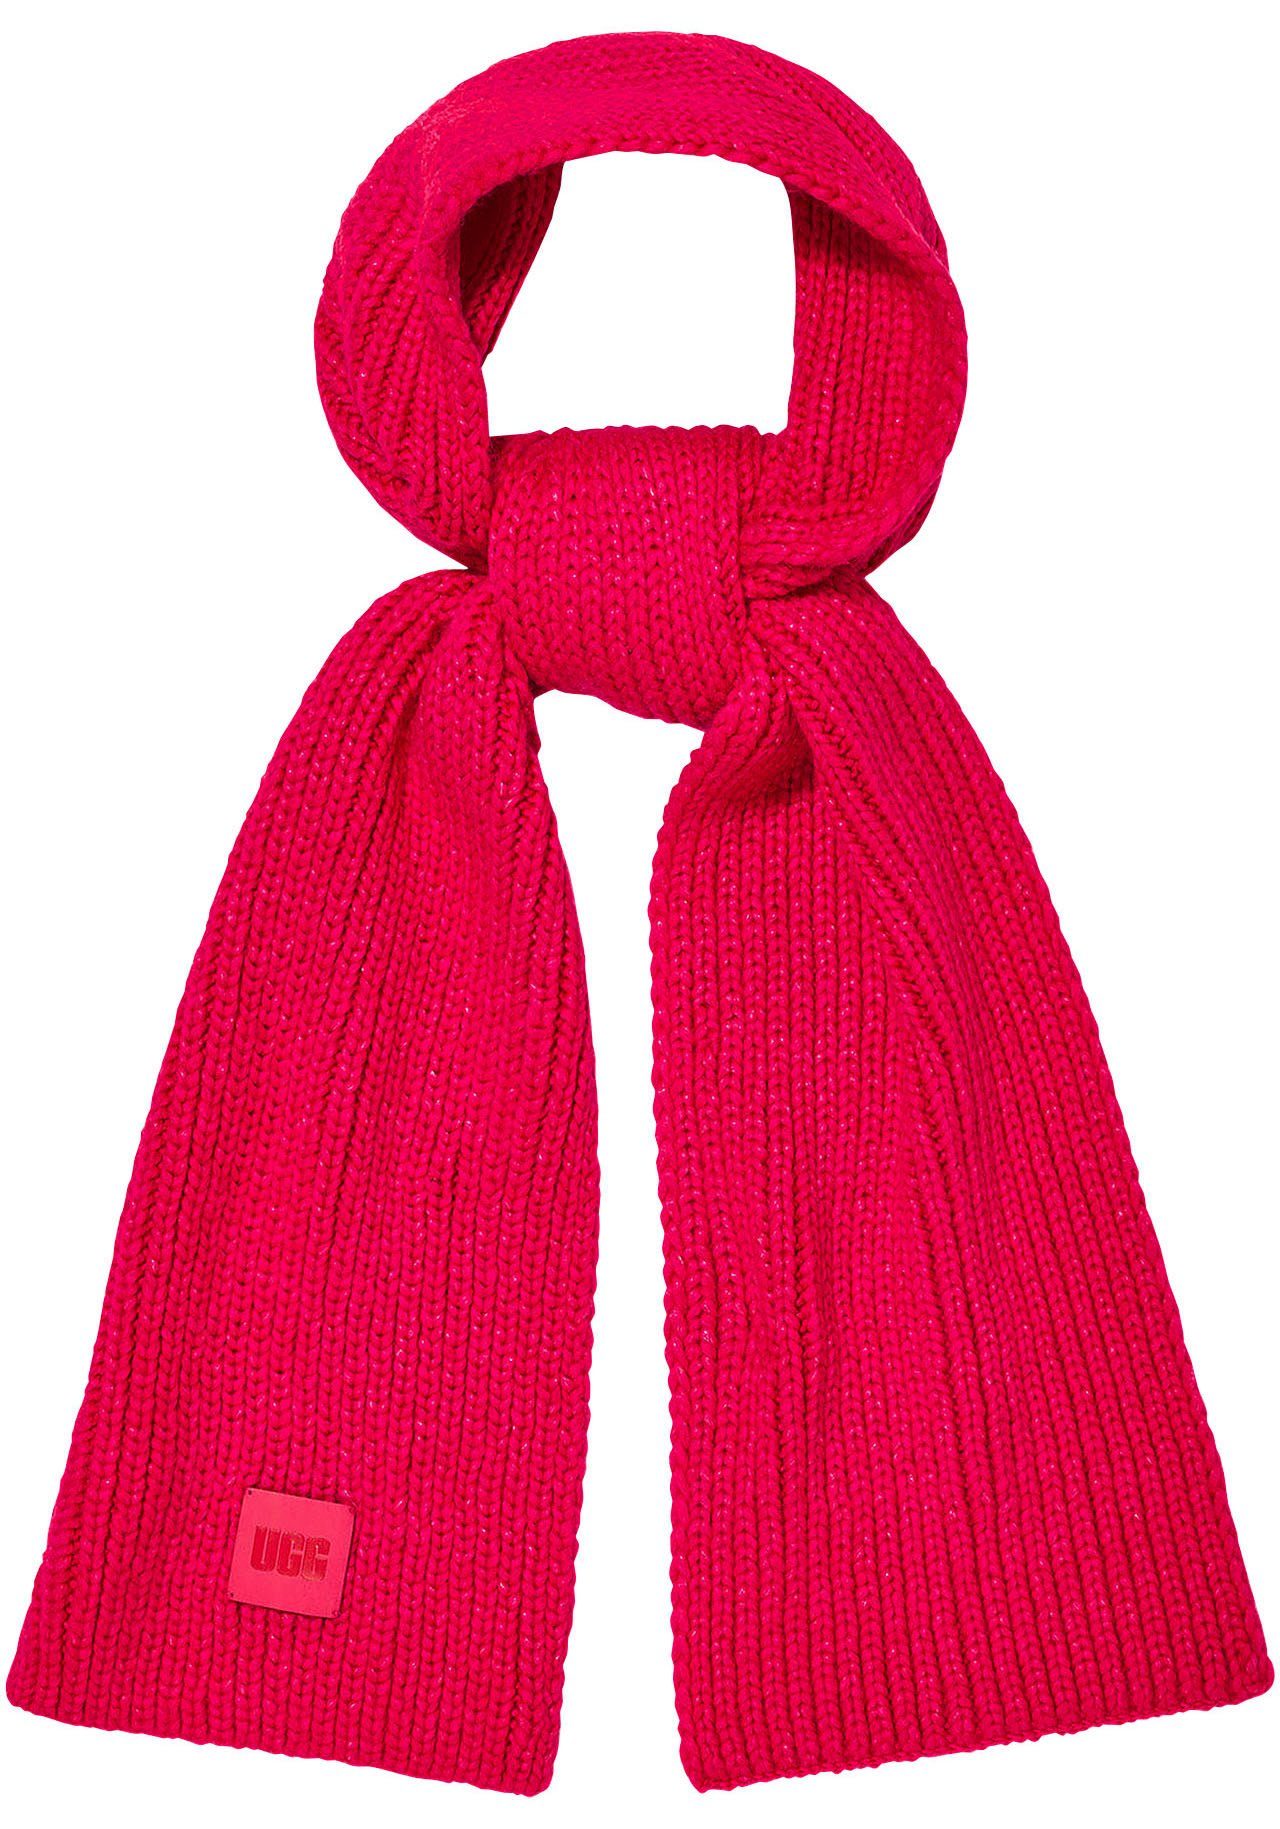 UGG Schal W Passform SCARF, CHUNKY RIB KNIT Normale